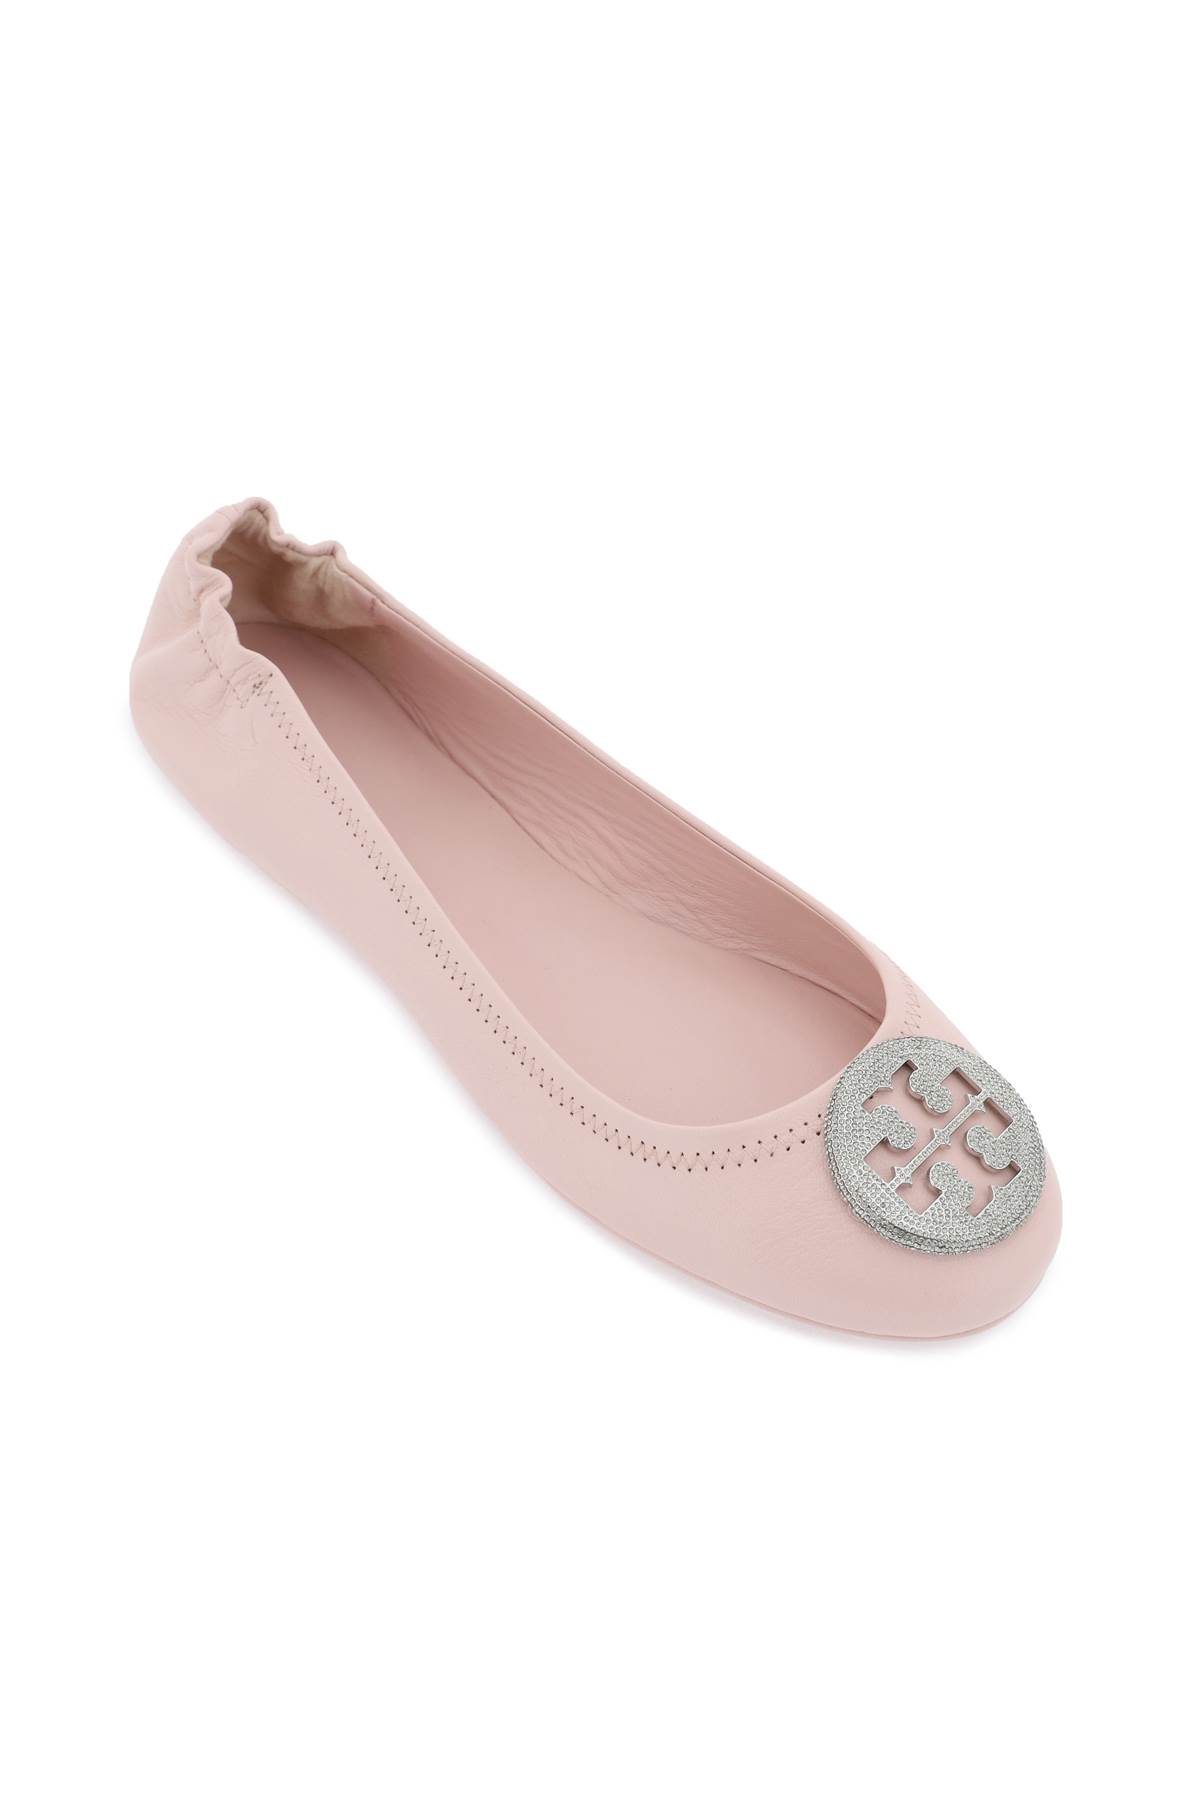 Shop Tory Burch Minnie Travel Ballet Flats In Shell Pink Silver (pink)